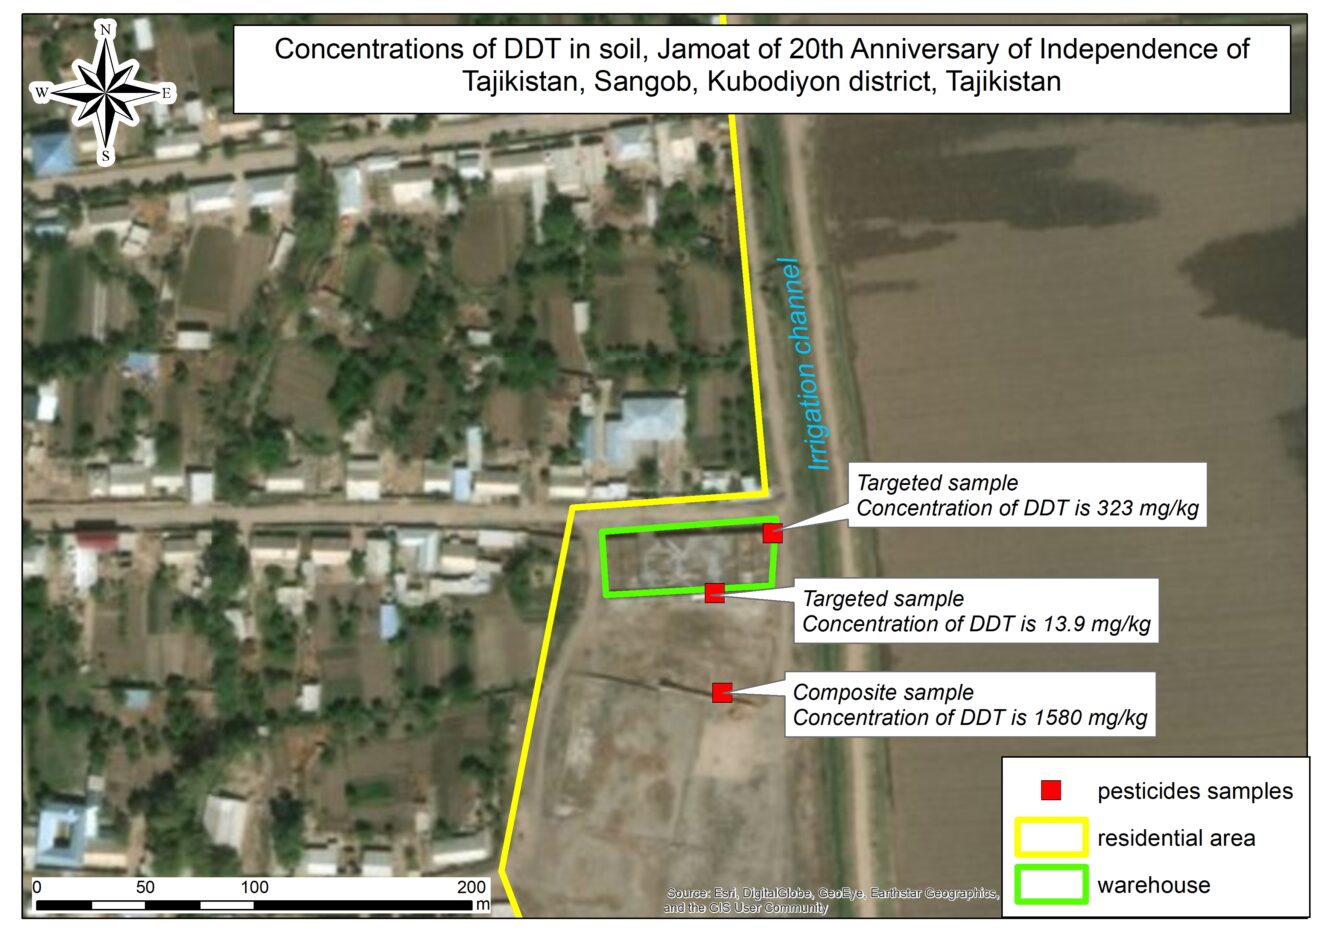 Concentrations of DDT in soil, Sangoba, Tajikistan, map by Environmental Health and Pollution Management Institute, EHPMI, Peshsaf